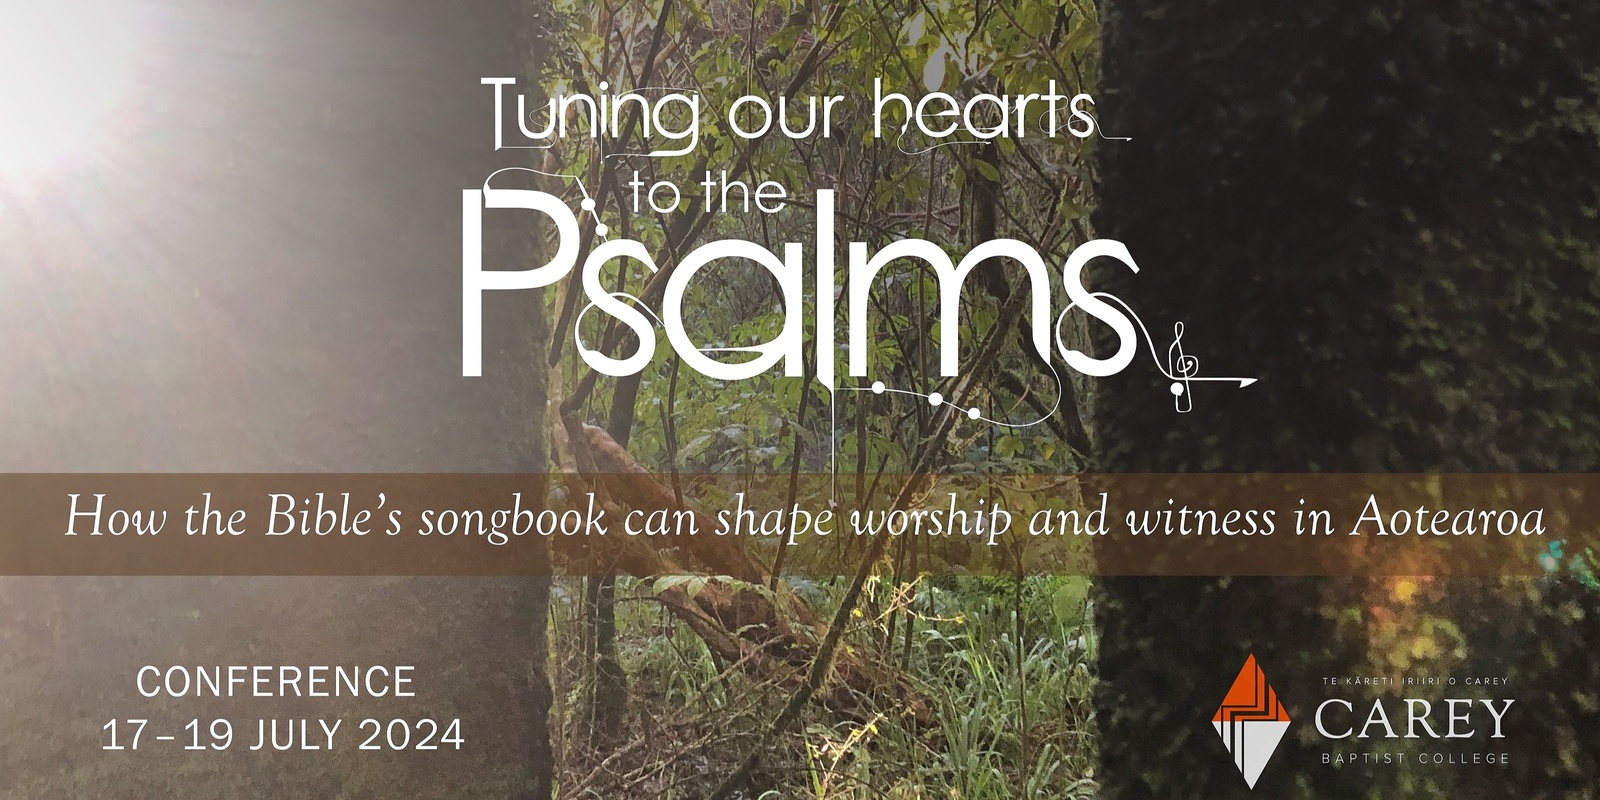 Banner image for Psalms Conference